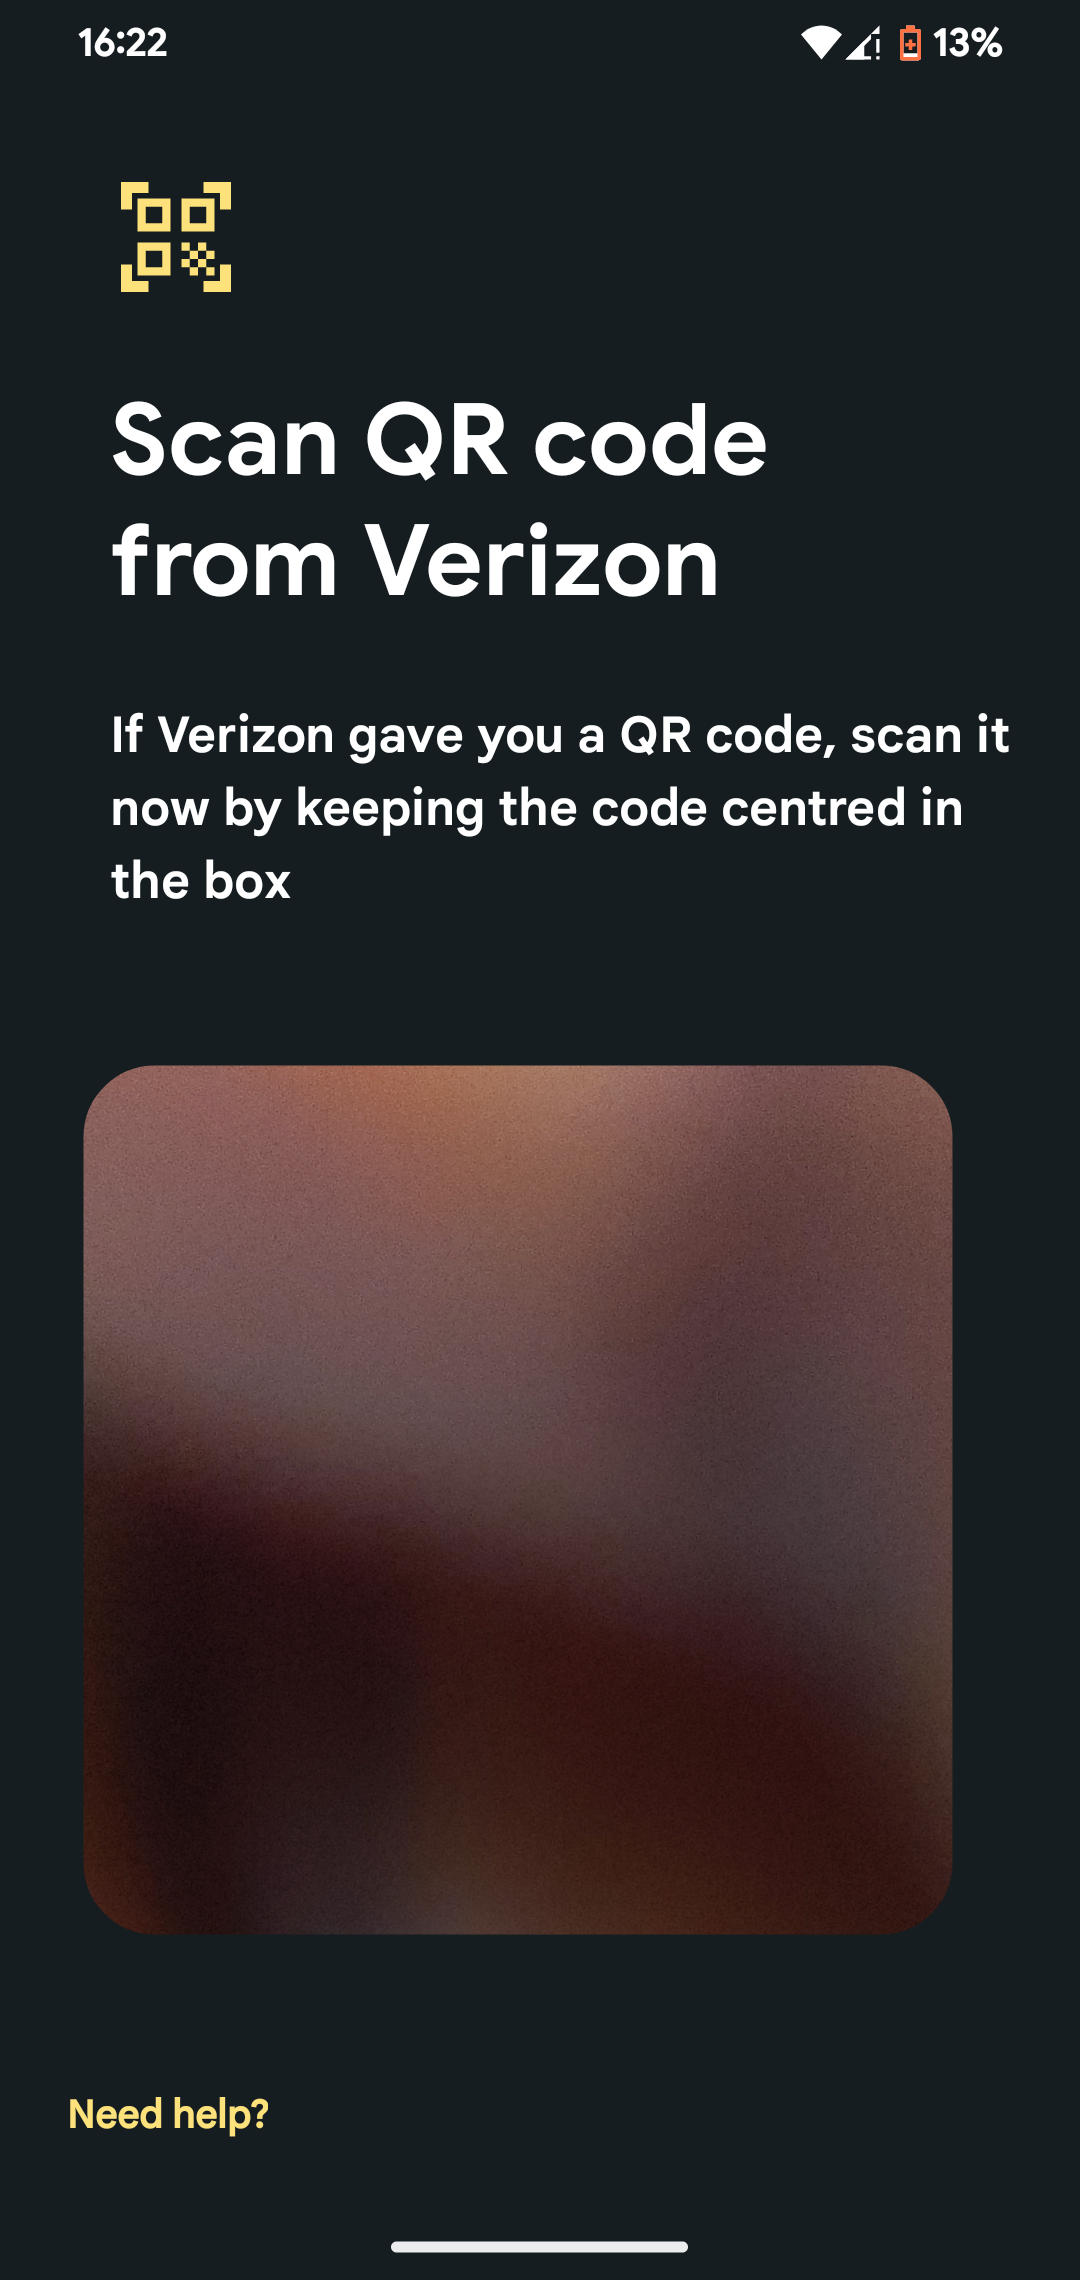 For those who need a QR code : r/verizon